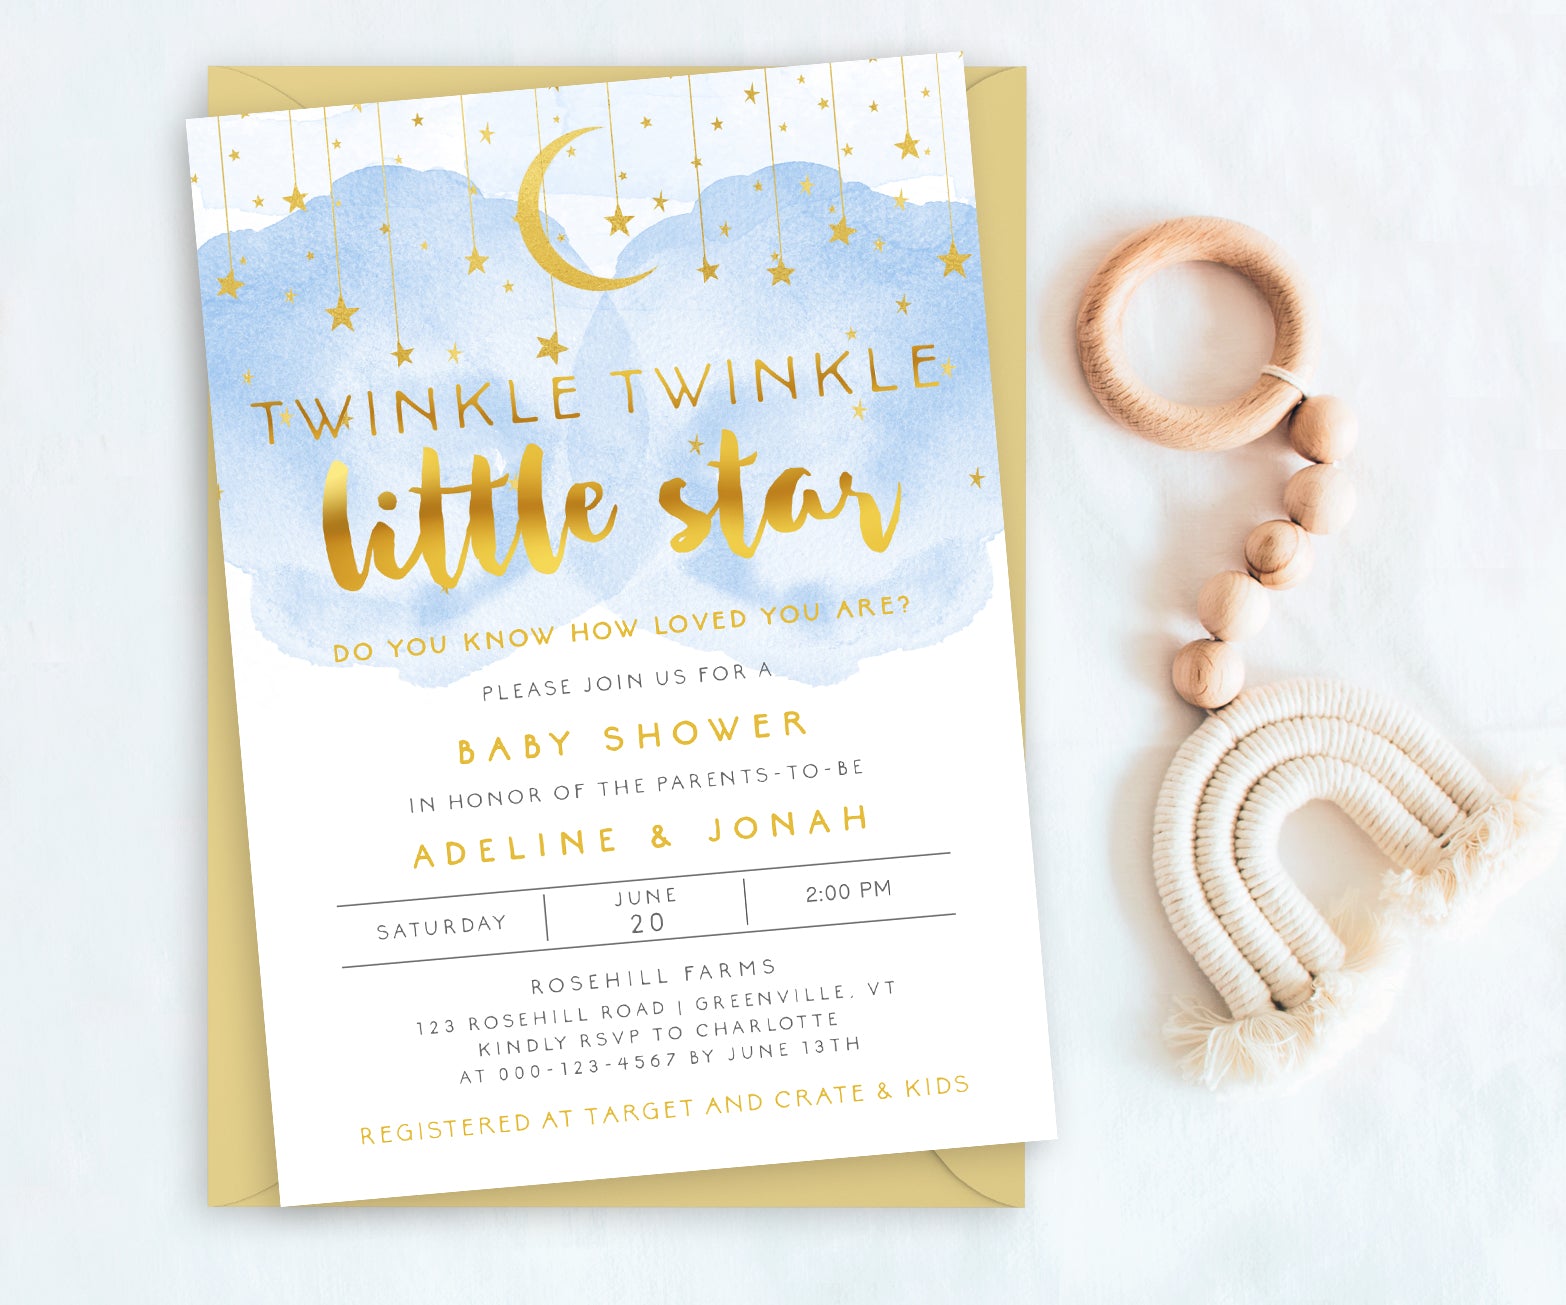 twinkle twinkle little star 5 x 7 inch baby shower invitation with blue smoke, gold moon and stars, gold script text from Artful Life Designs